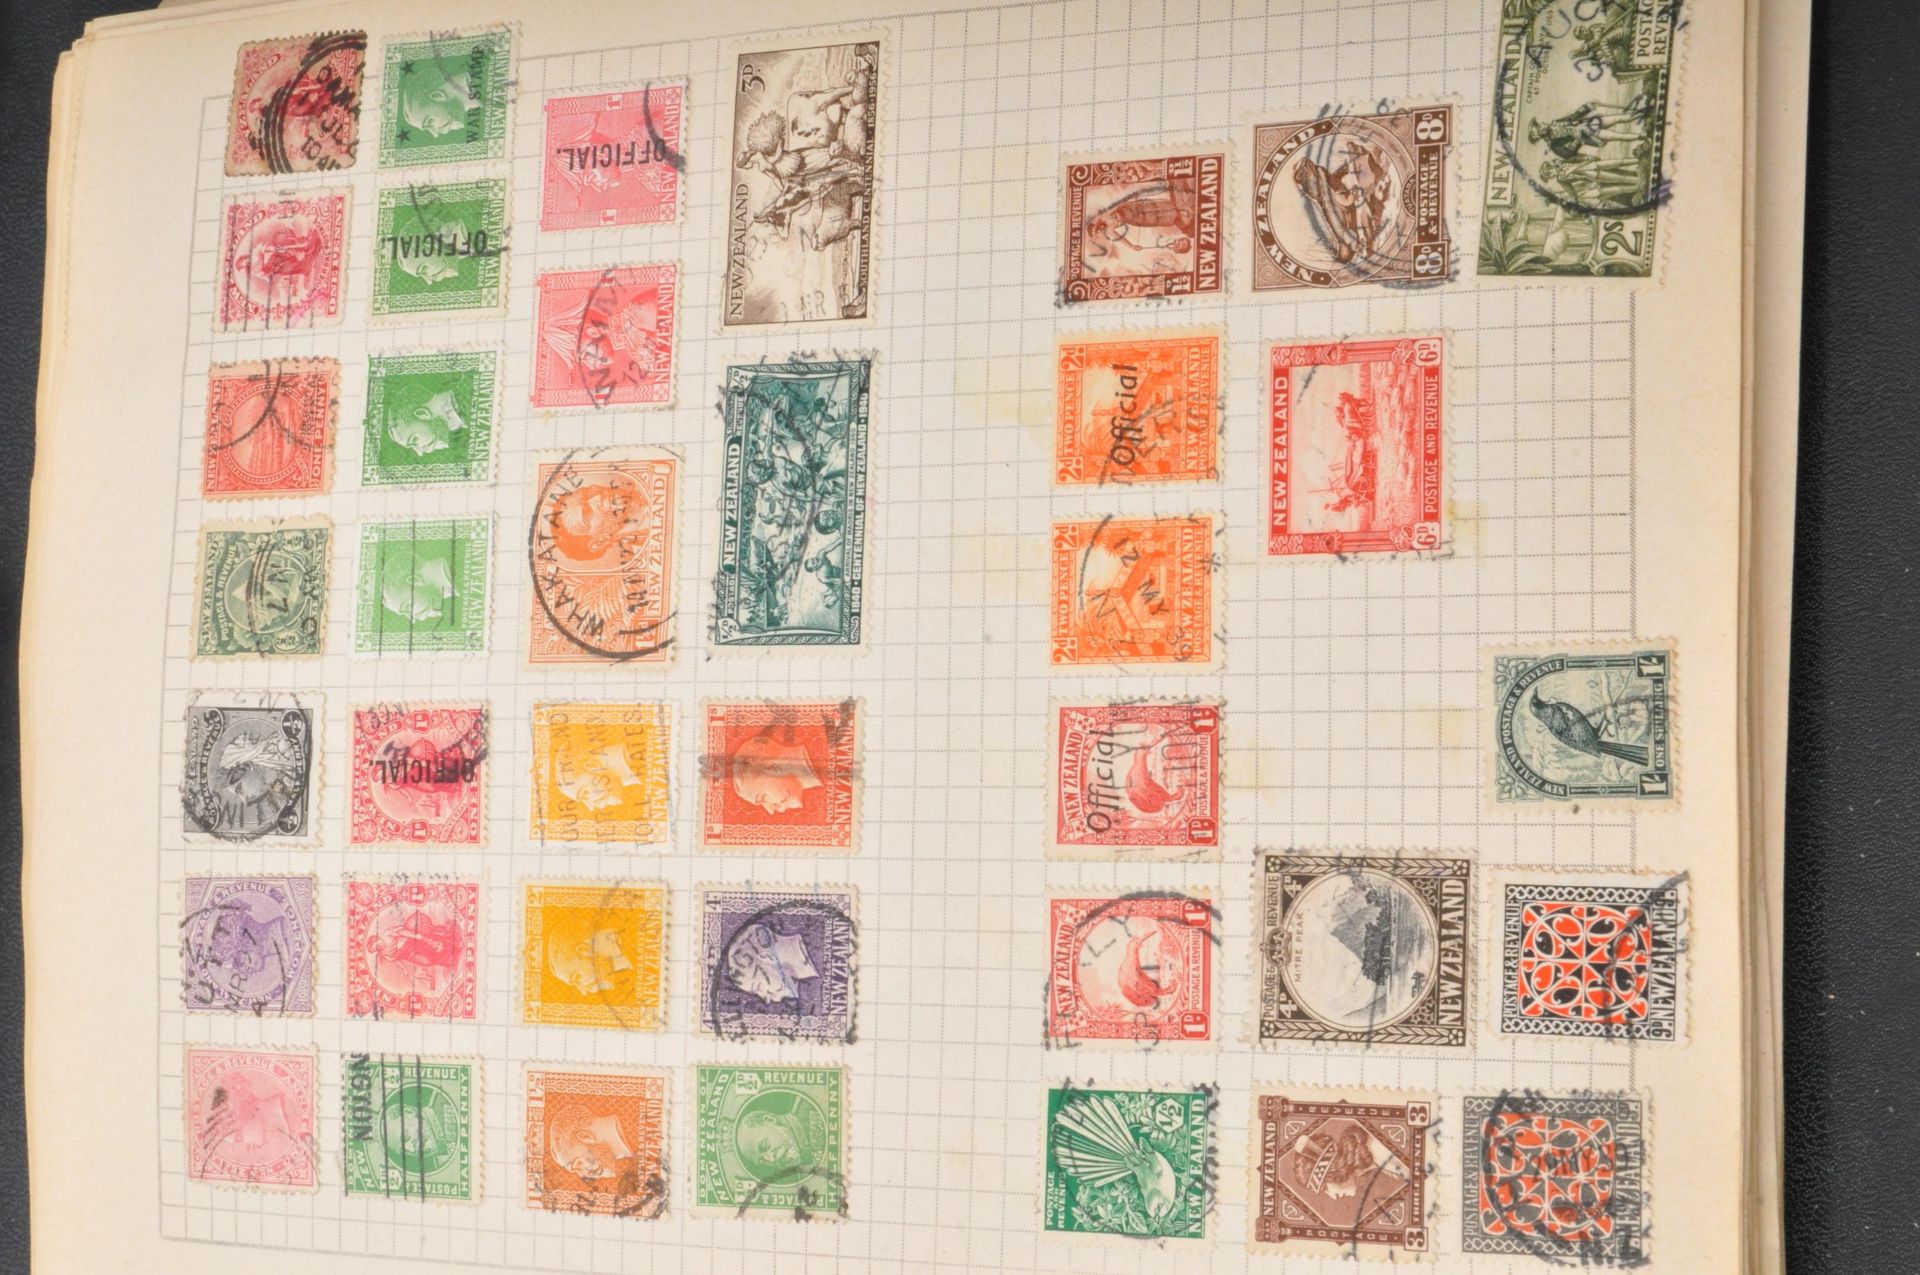 LARGE COLLECTION OF VINTAGE UK & FOREIGN STAMPS ALBUMS - Image 4 of 6